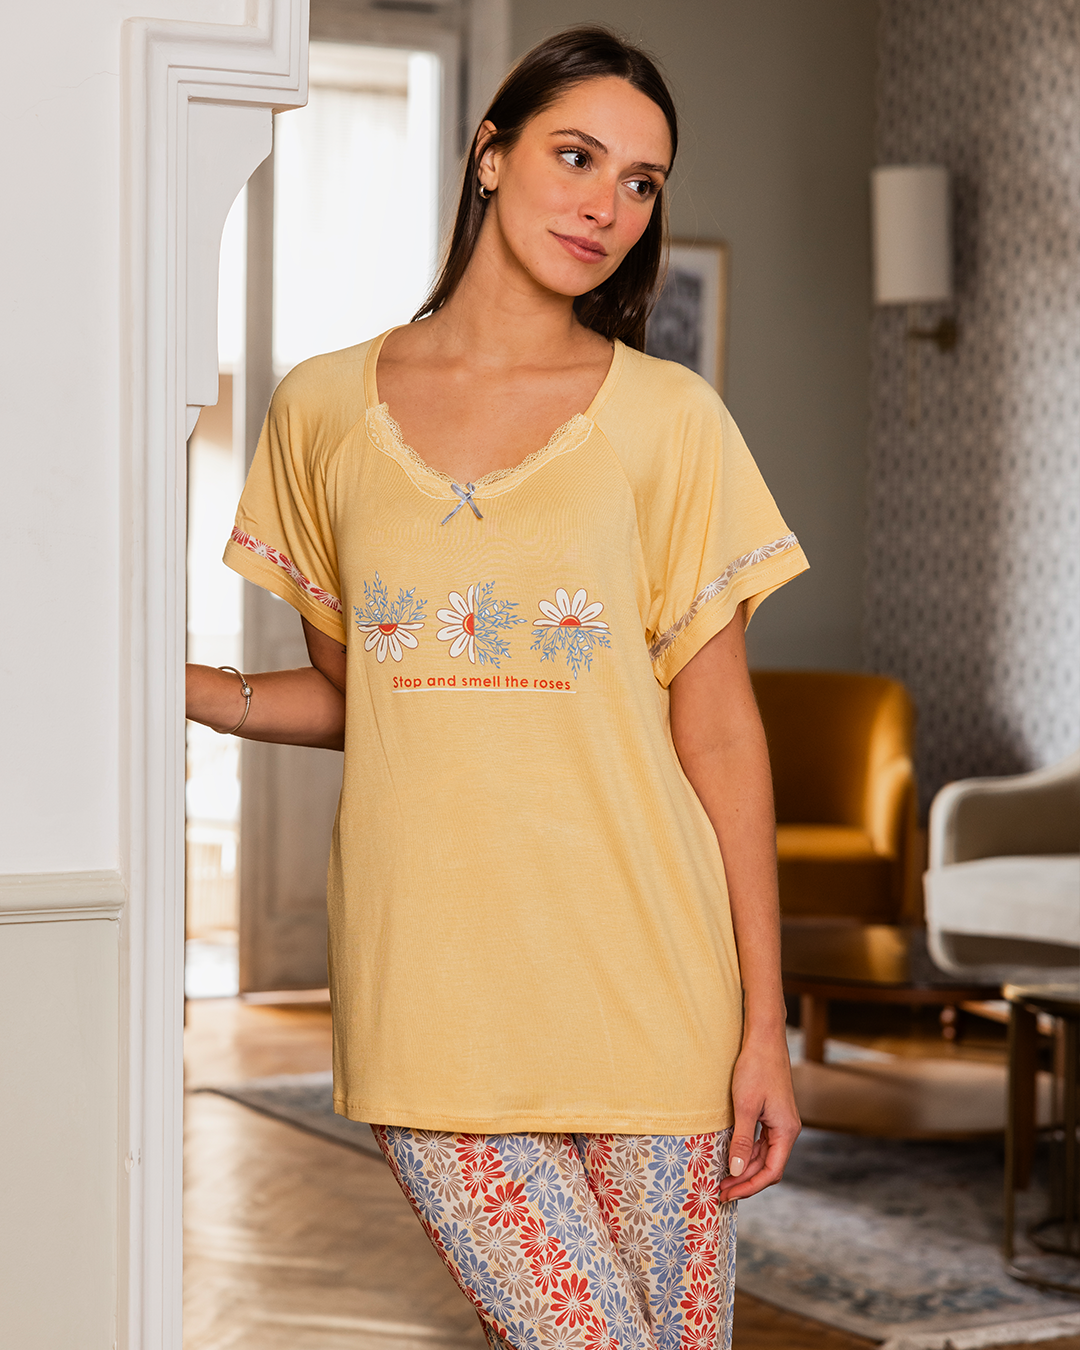 stop and smell roses Women's pajamas, long pants, half-sleeve T-shirt, rose print on the chest